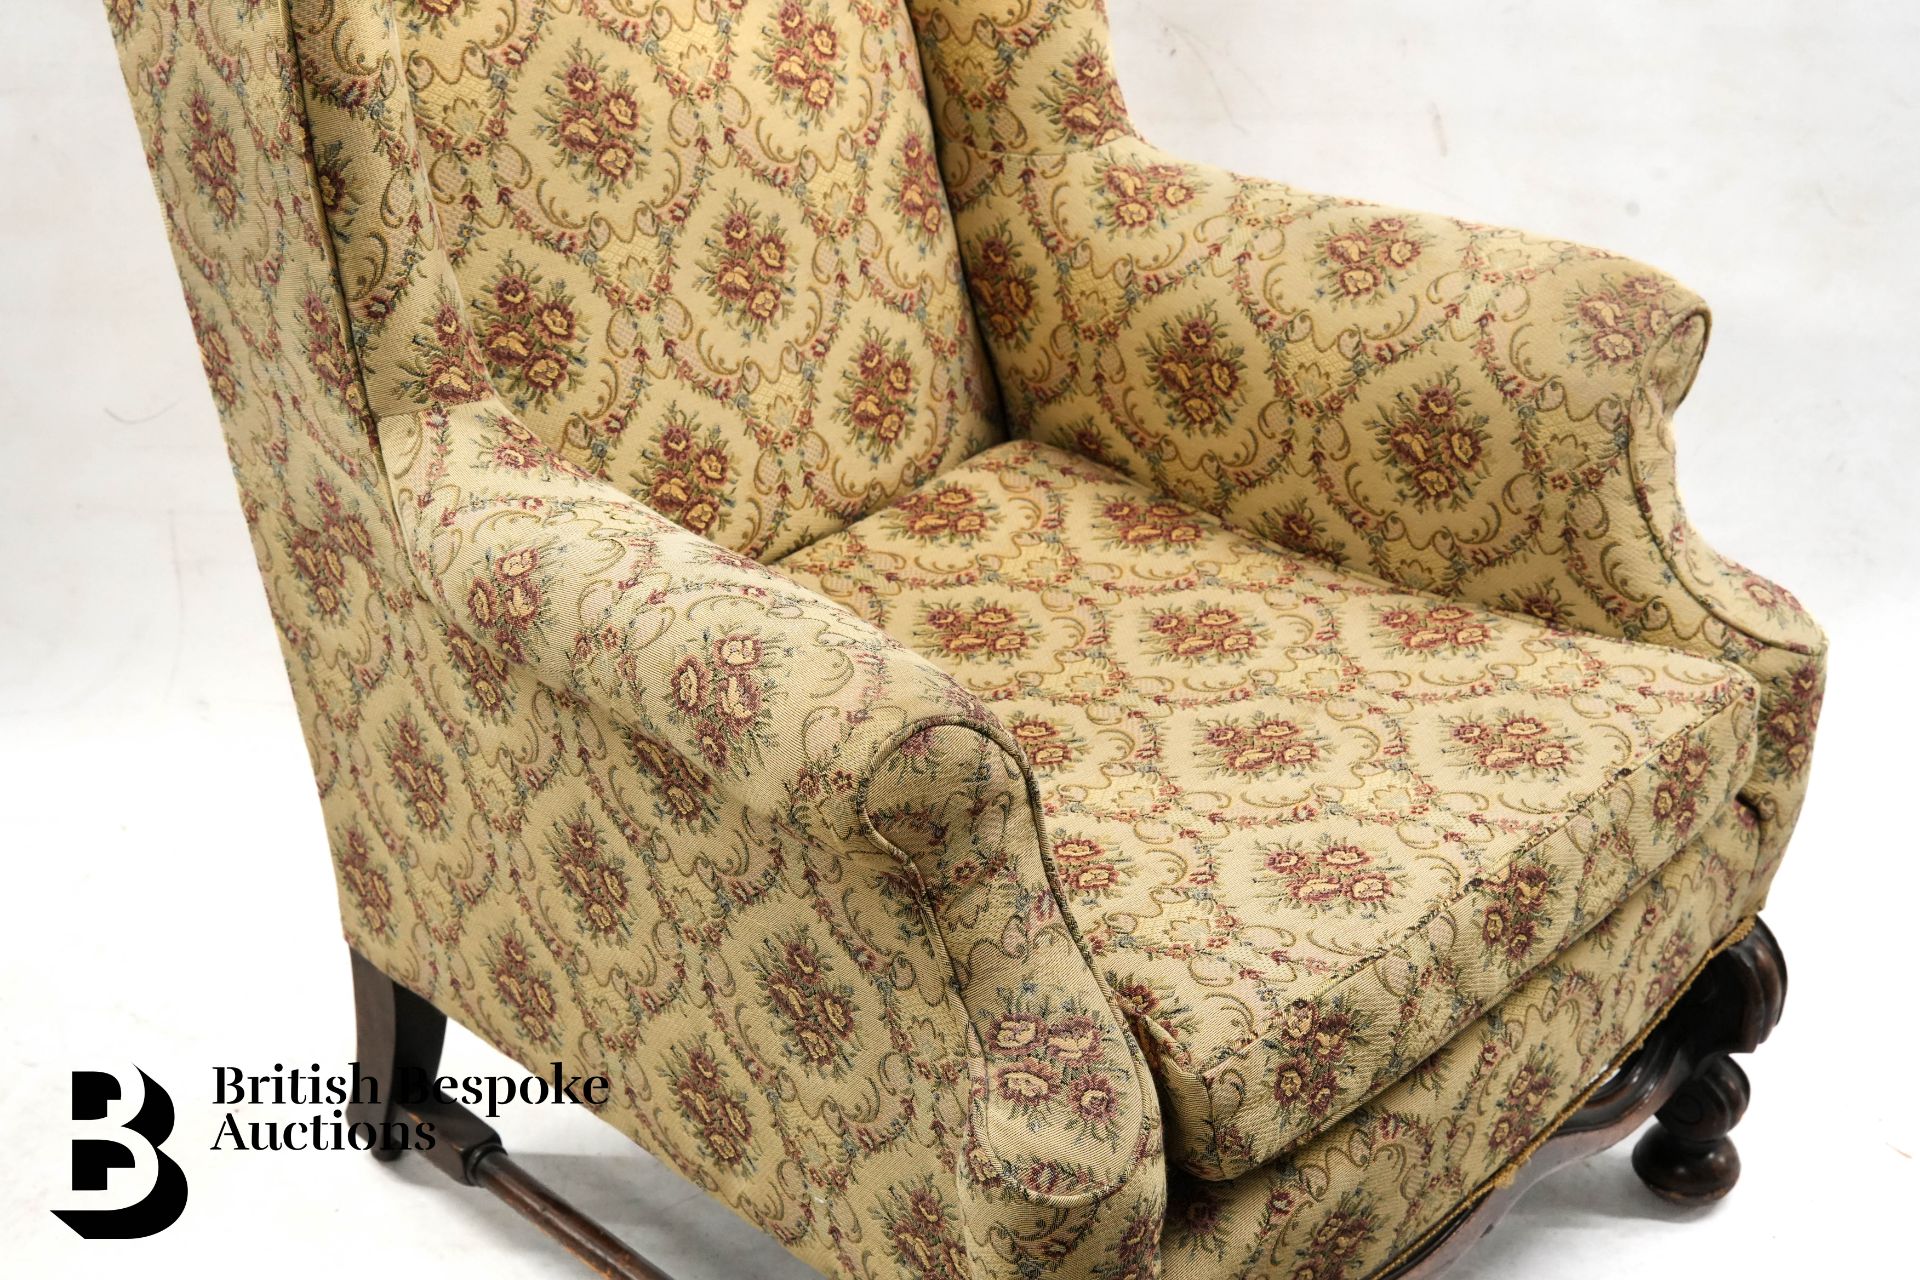 Queen Anne Wingback Chair - Image 5 of 7